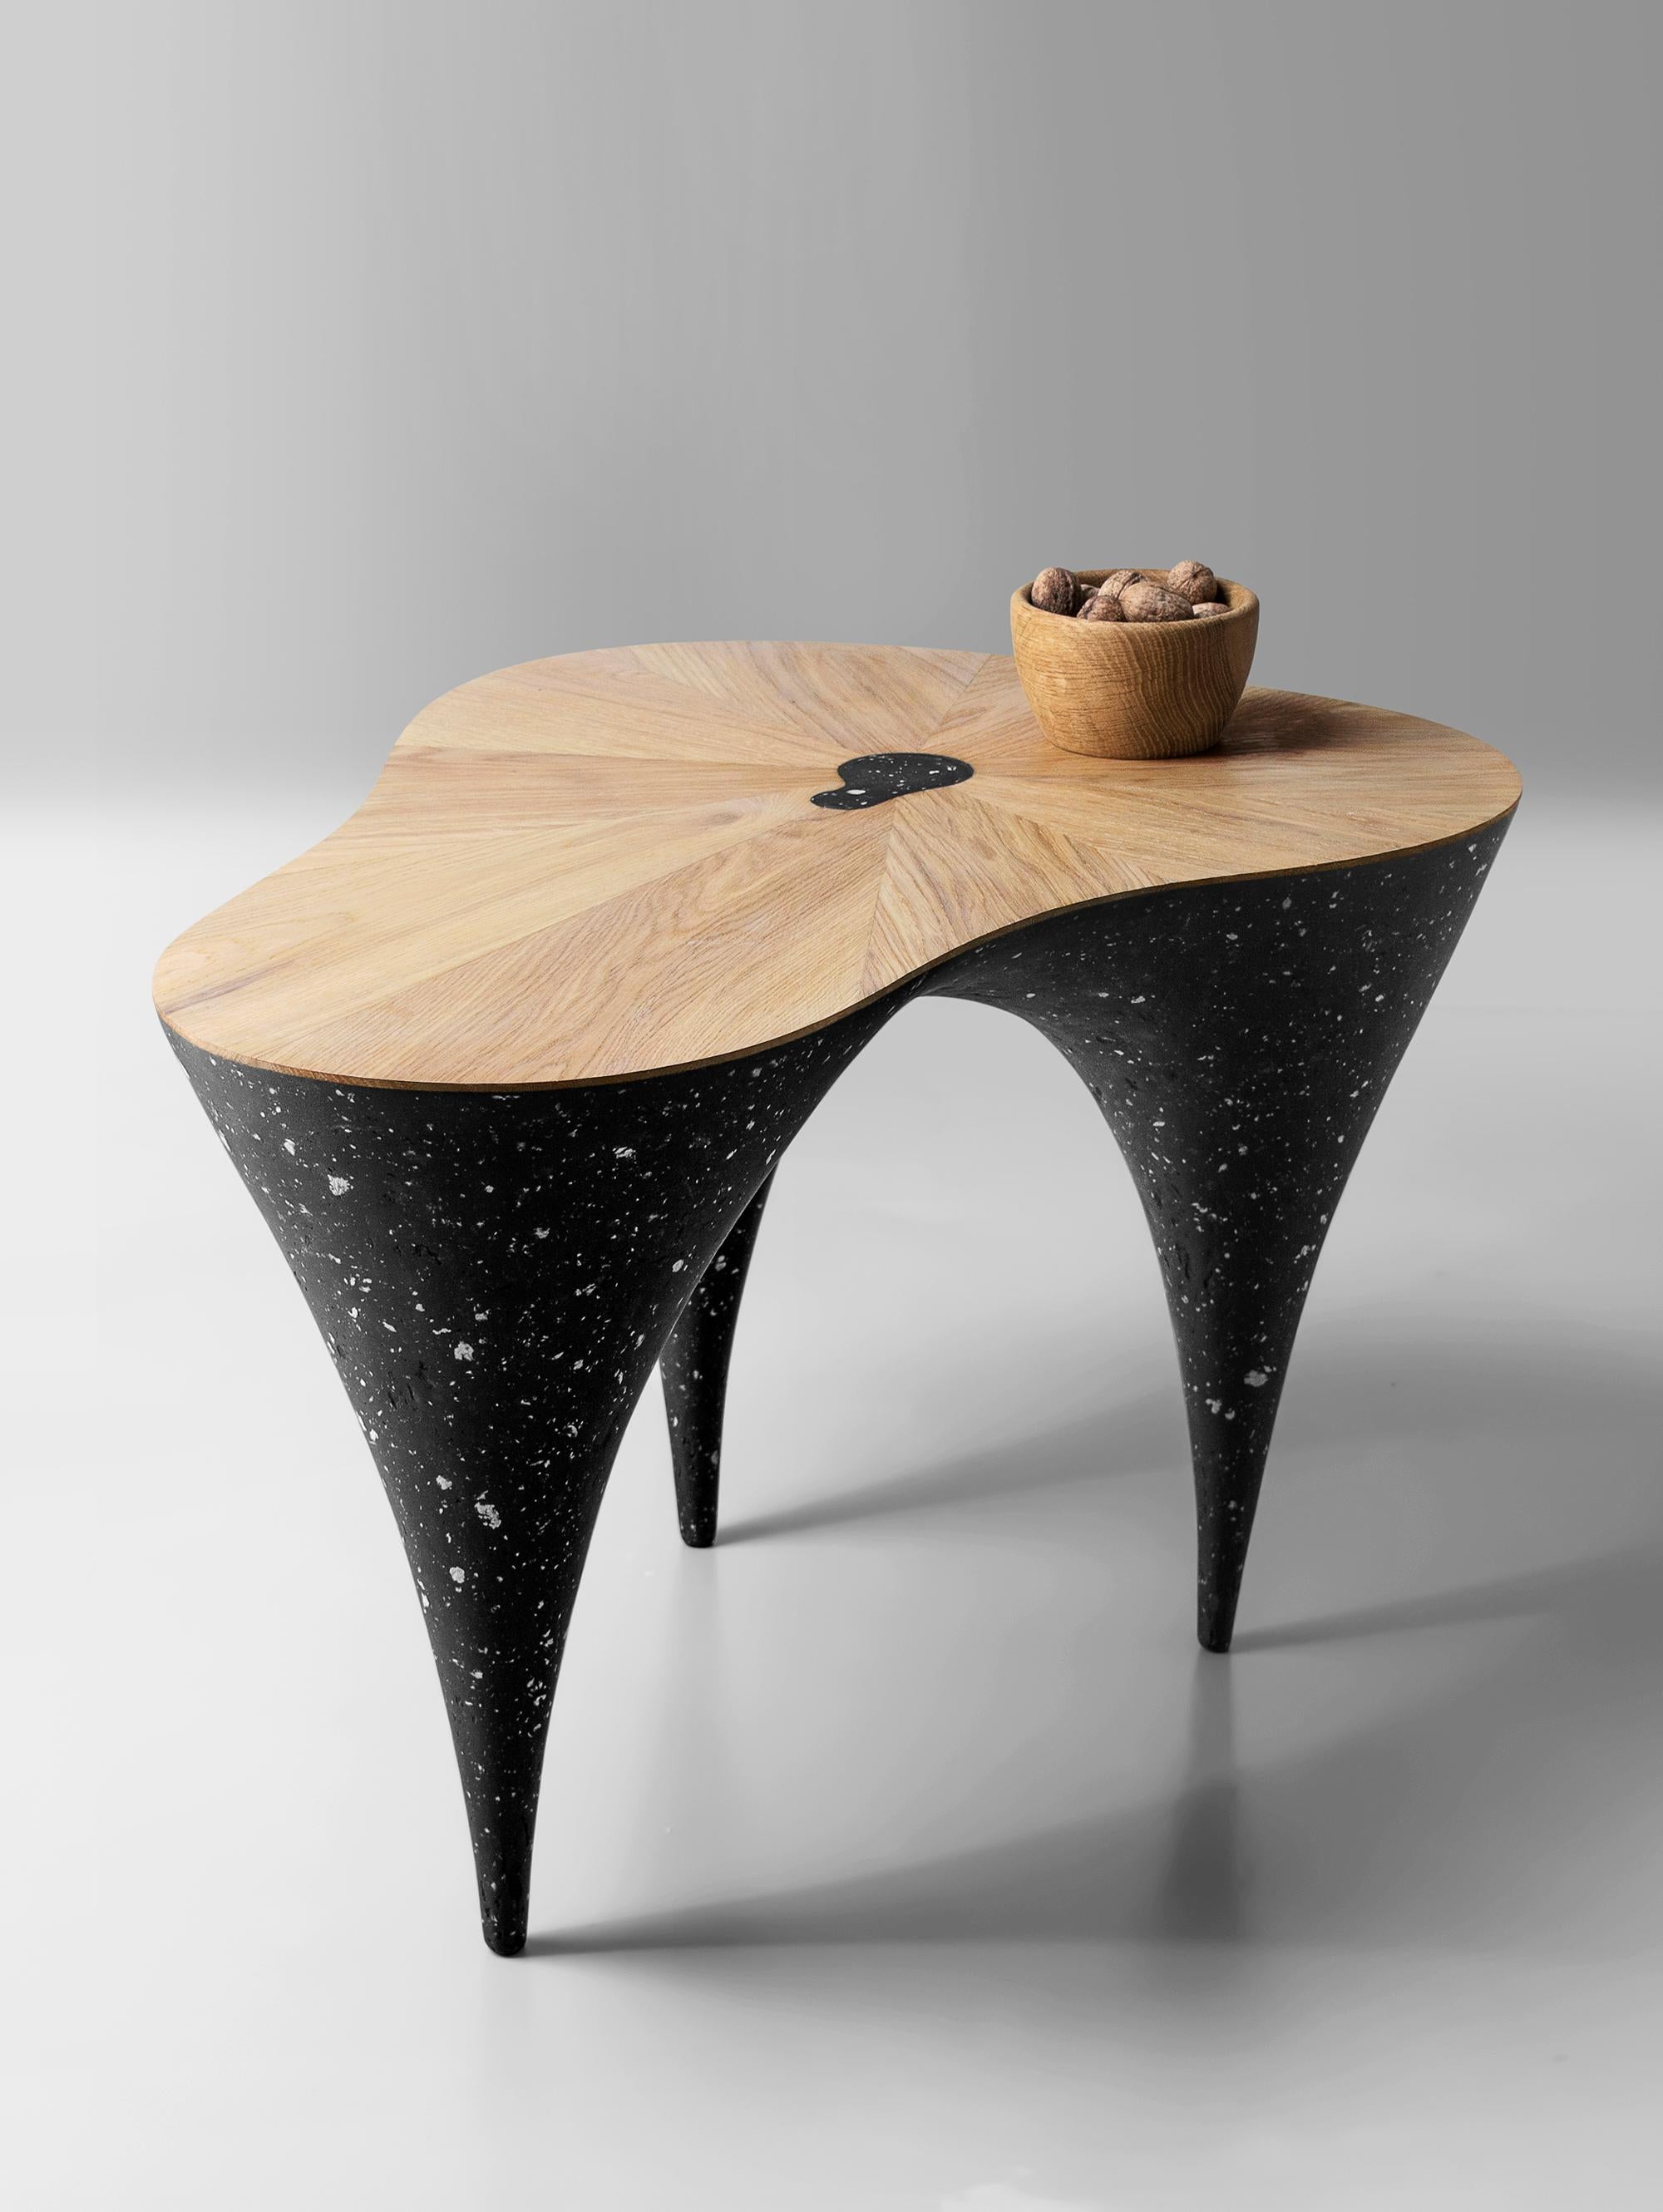 Wave Coffee Table by Kasanai
Dimensions: D 72 x W 55 x H 46 cm.
Materials: Oak, mixed material (cement, recycled paper, glue, and paint).
12 kg

The visual inspiration for the coffee table is a combination of natural wood and concrete. These two